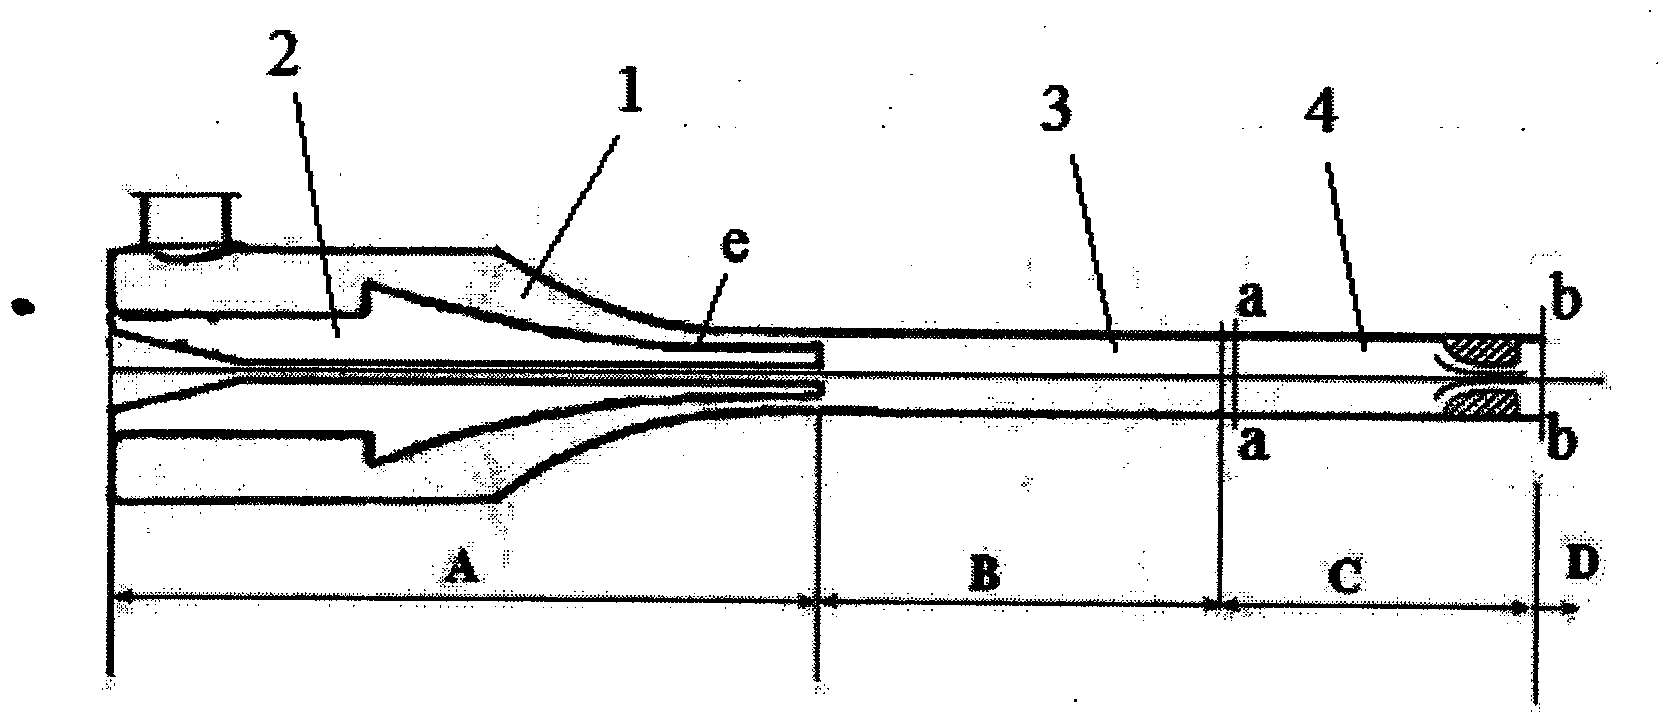 Main nozzle structure of air jet loom for producing elastic denim and weft insertion method thereof